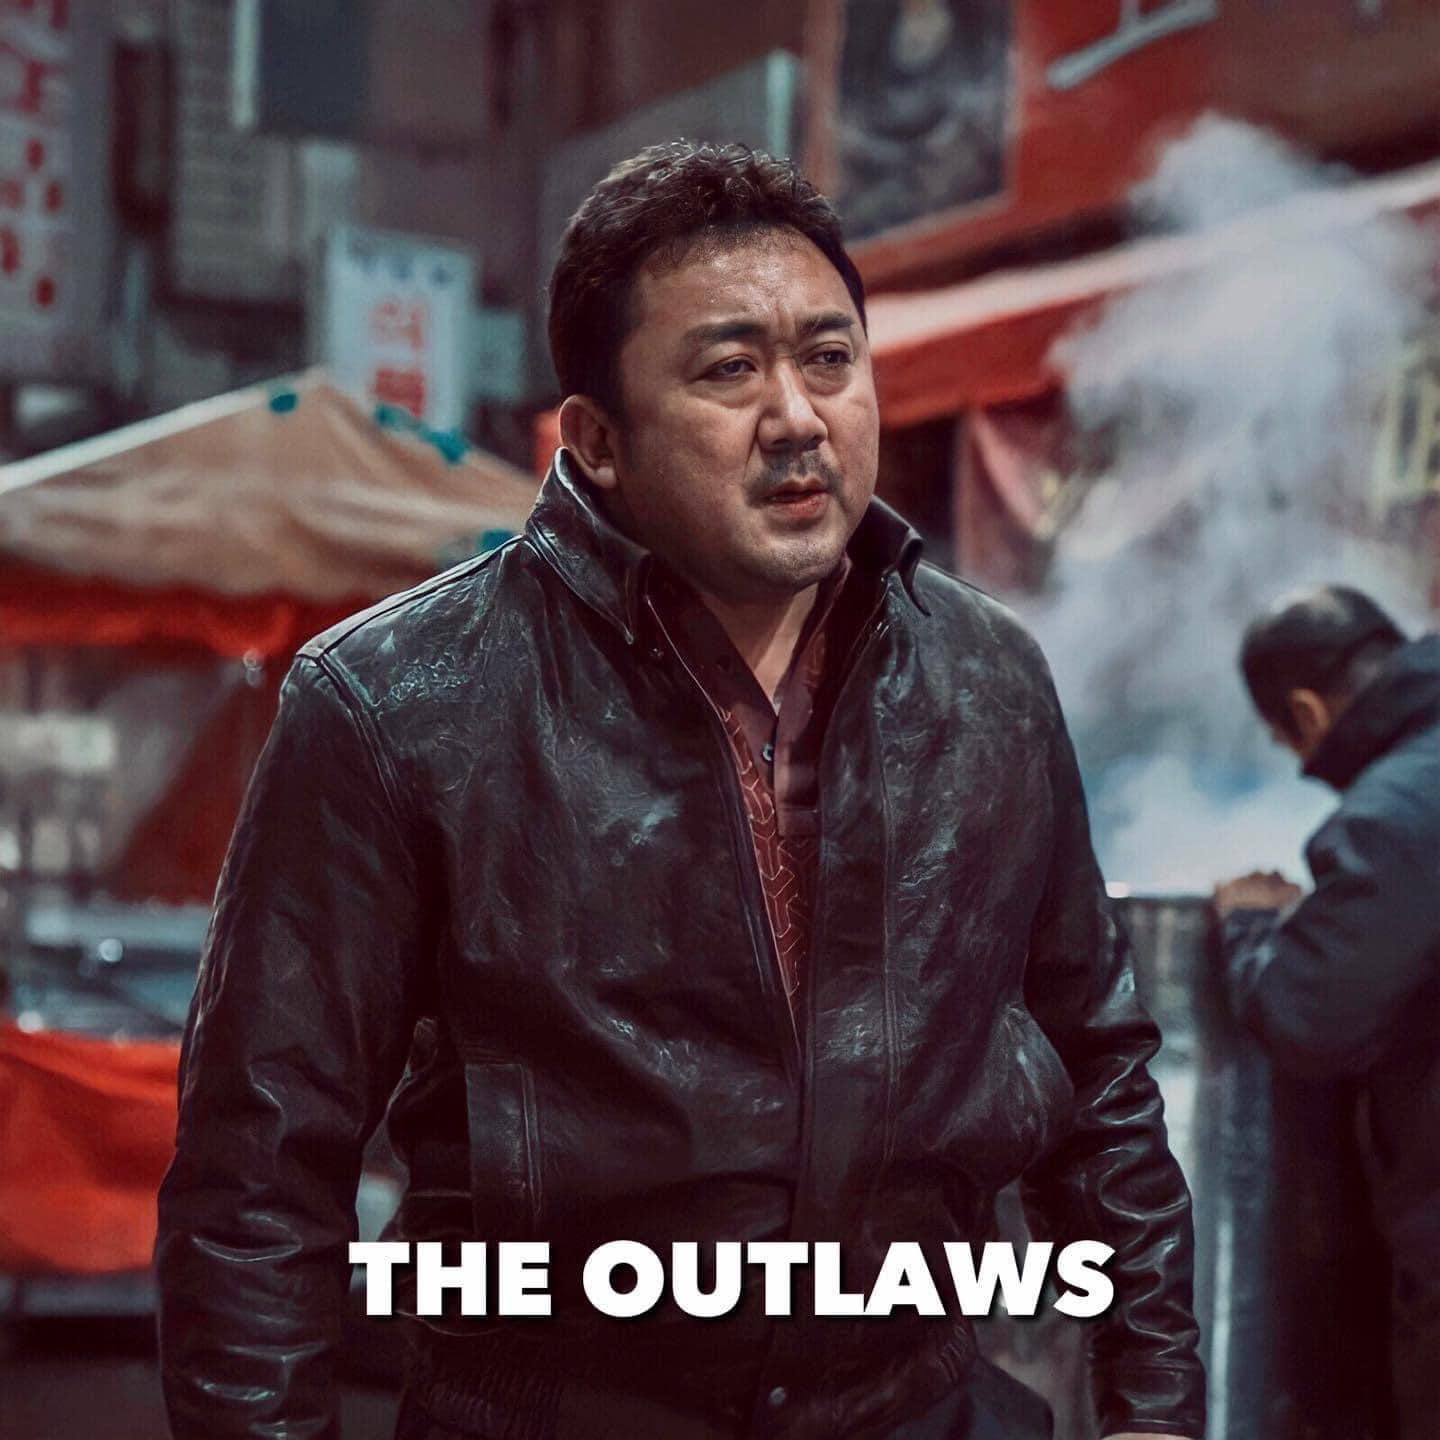 The Outlaws (2017)